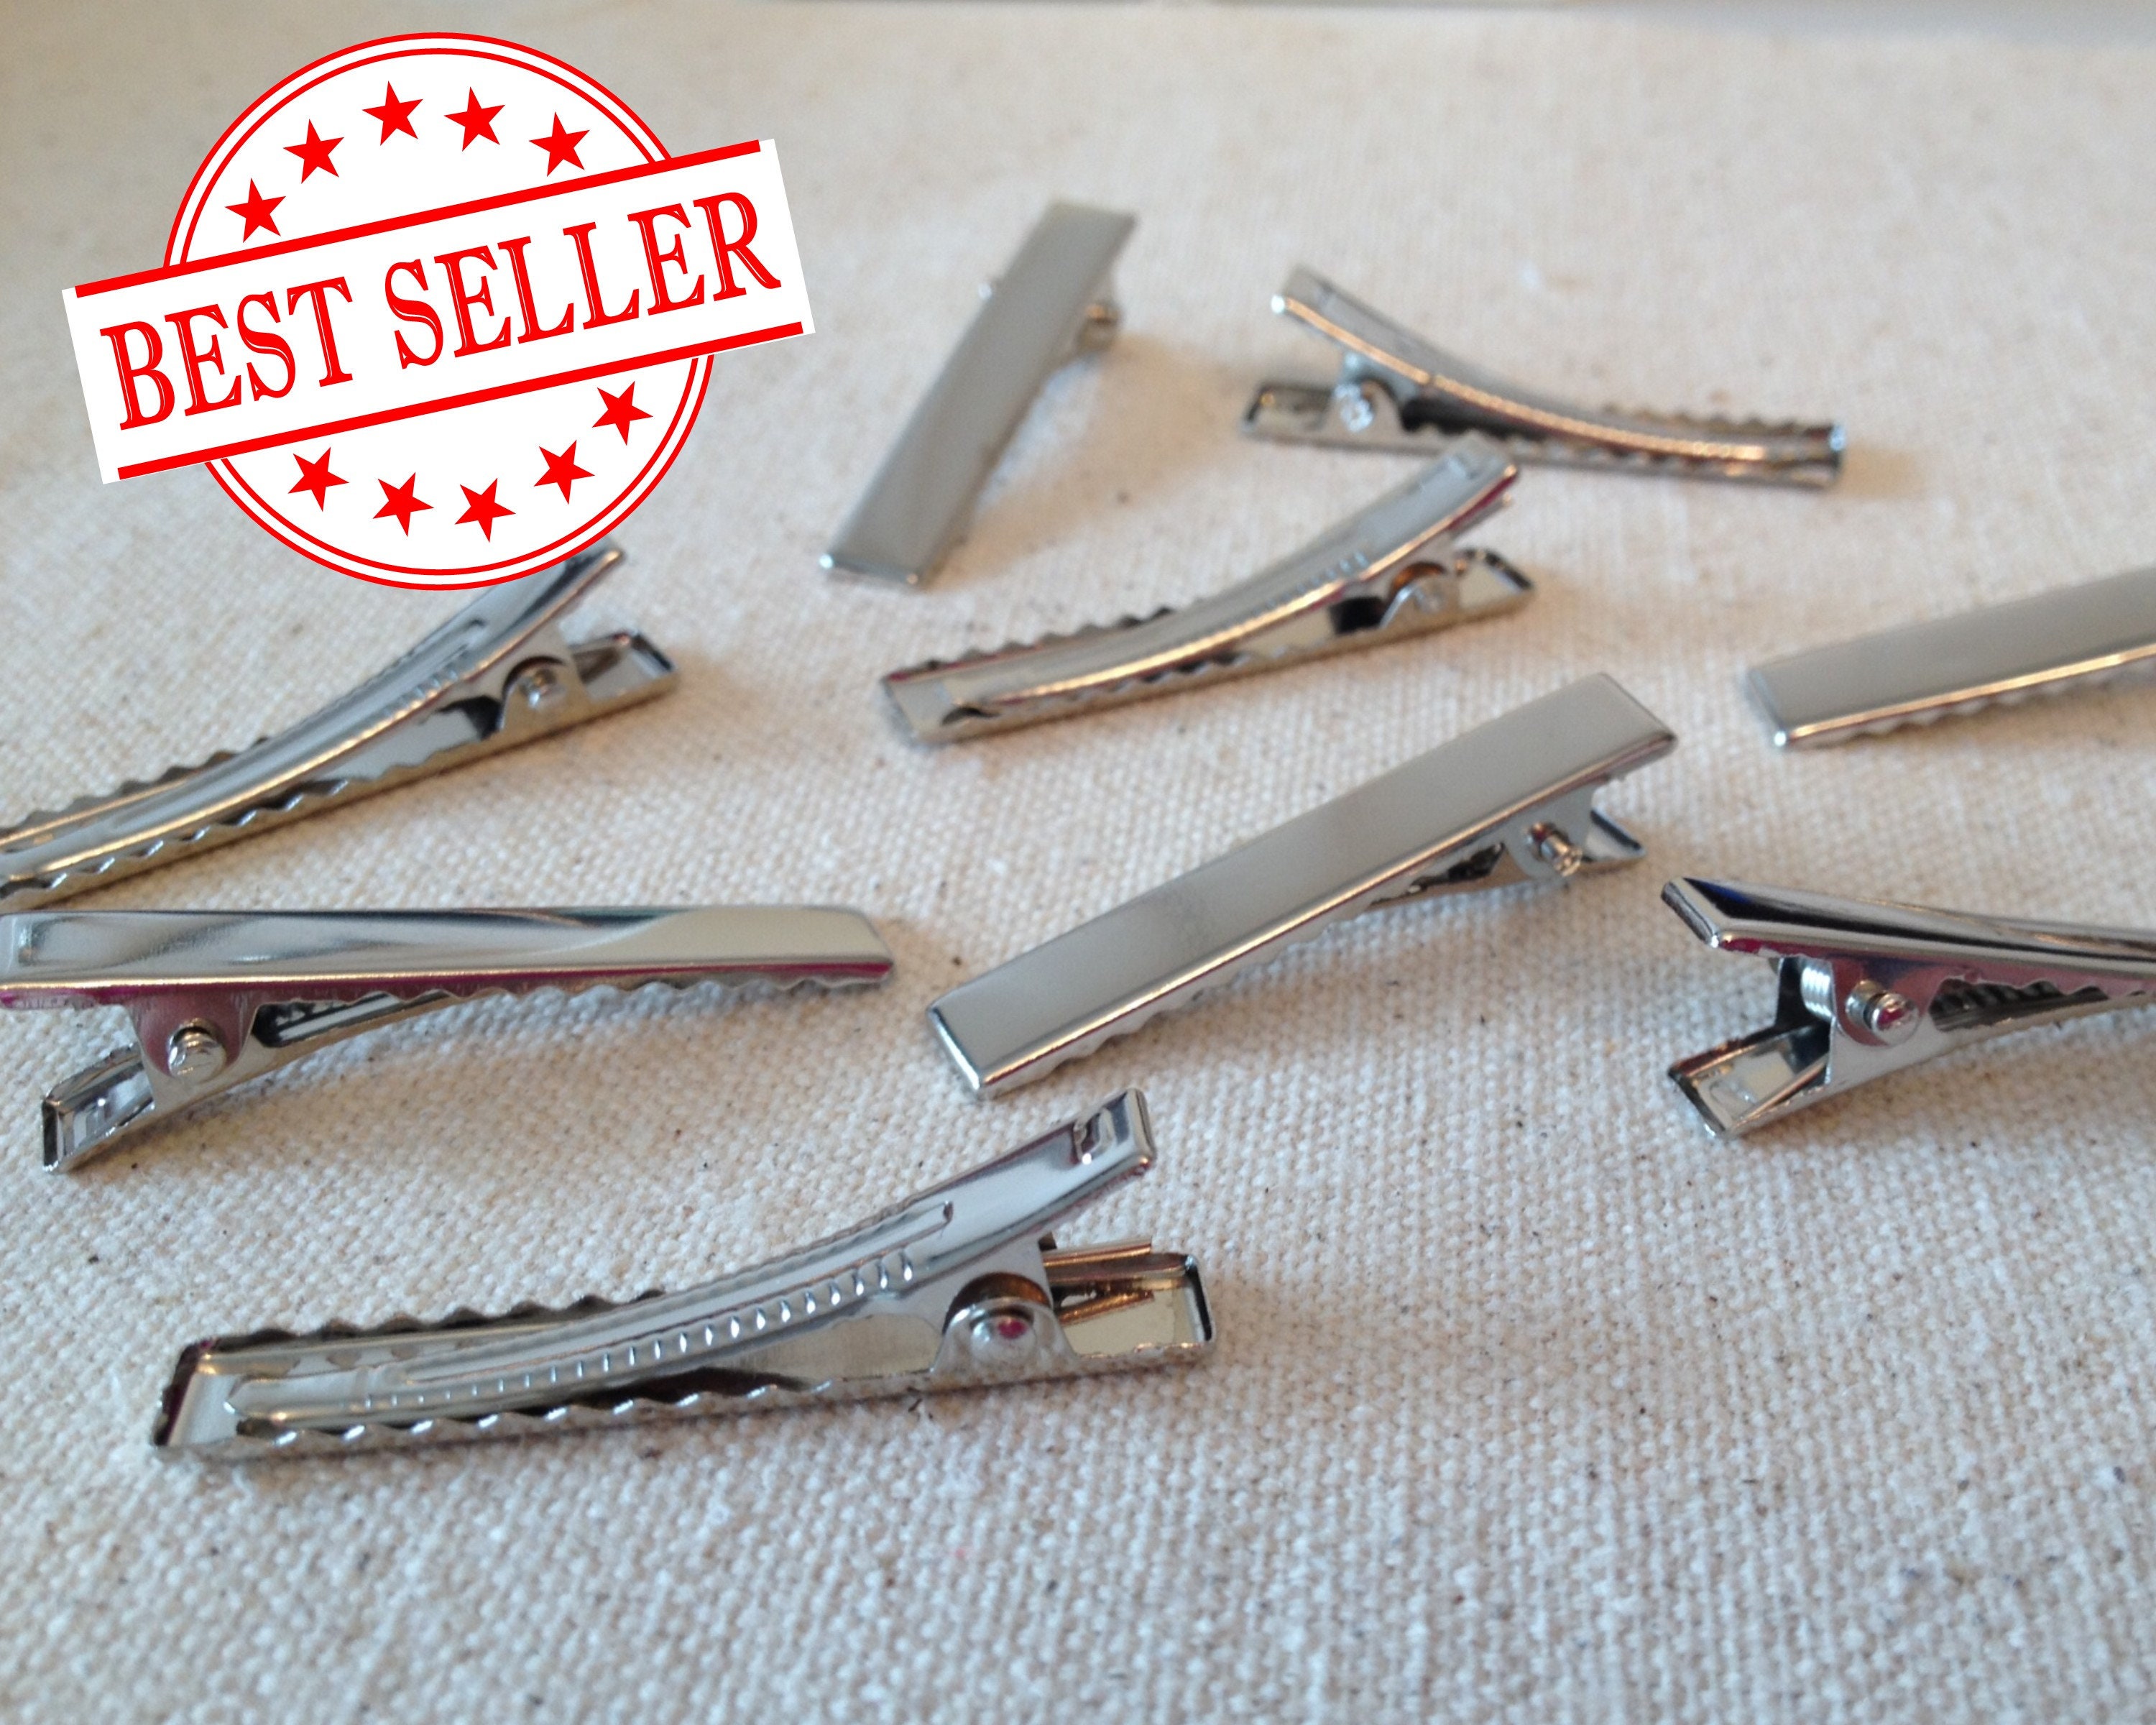 100 pcs 30MM 1.18 Square Hair Clips Alligator Teeth Clip Prong womens Barrette Hair Bows Color Nickel 